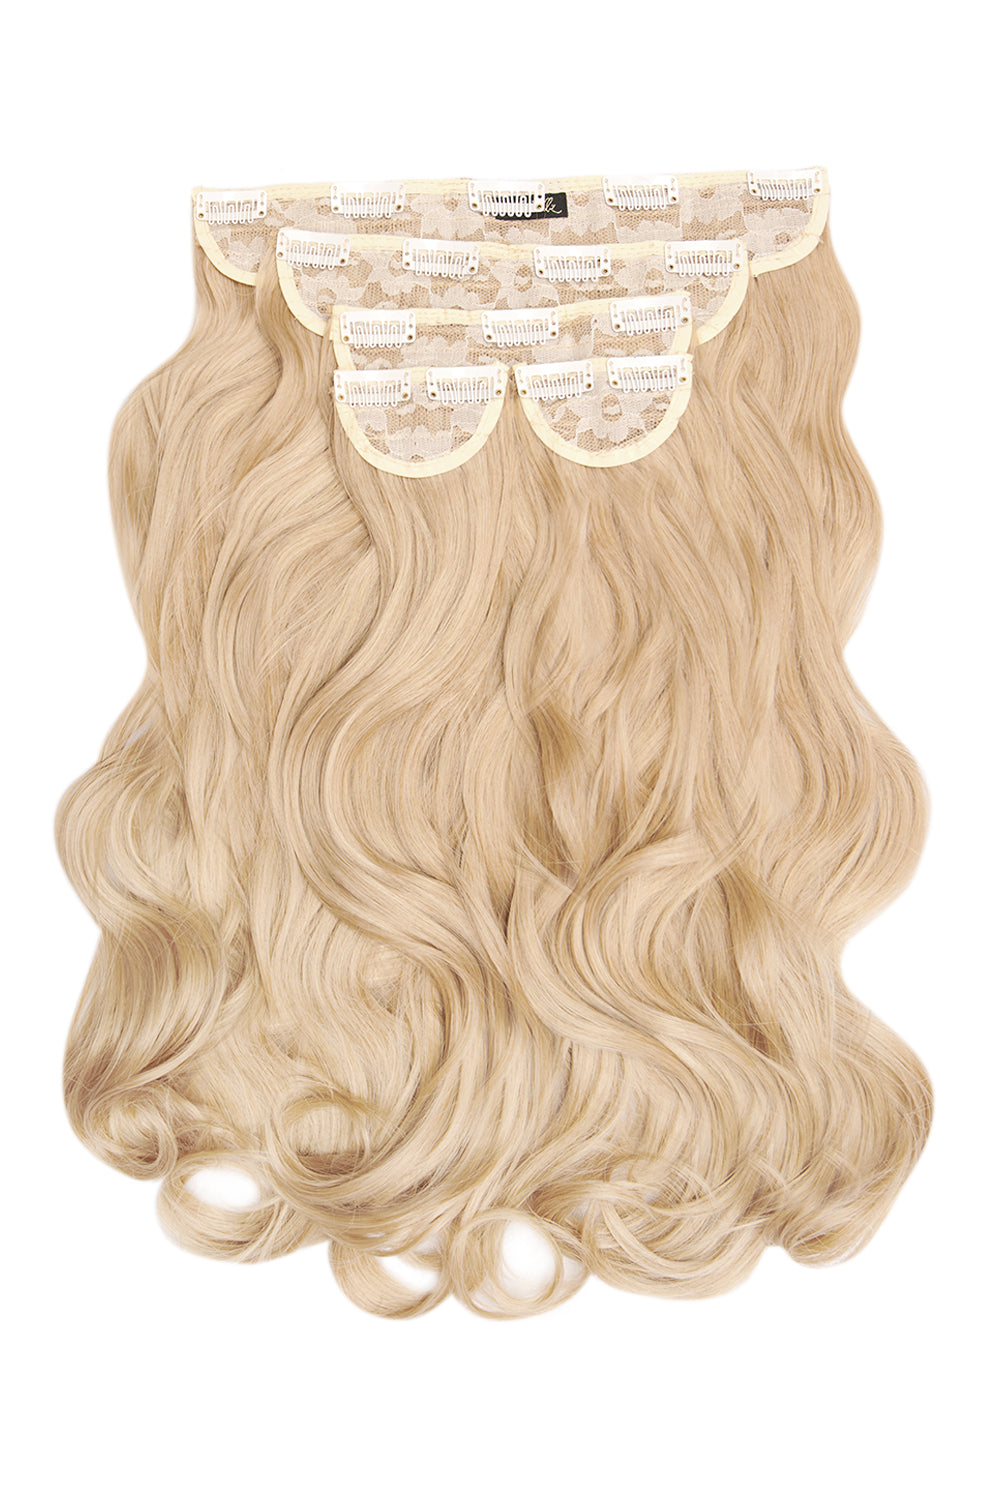 Super Thick 22" 5 Piece Natural Wavy Clip In Hair Extensions - LullaBellz - Champagne Blonde